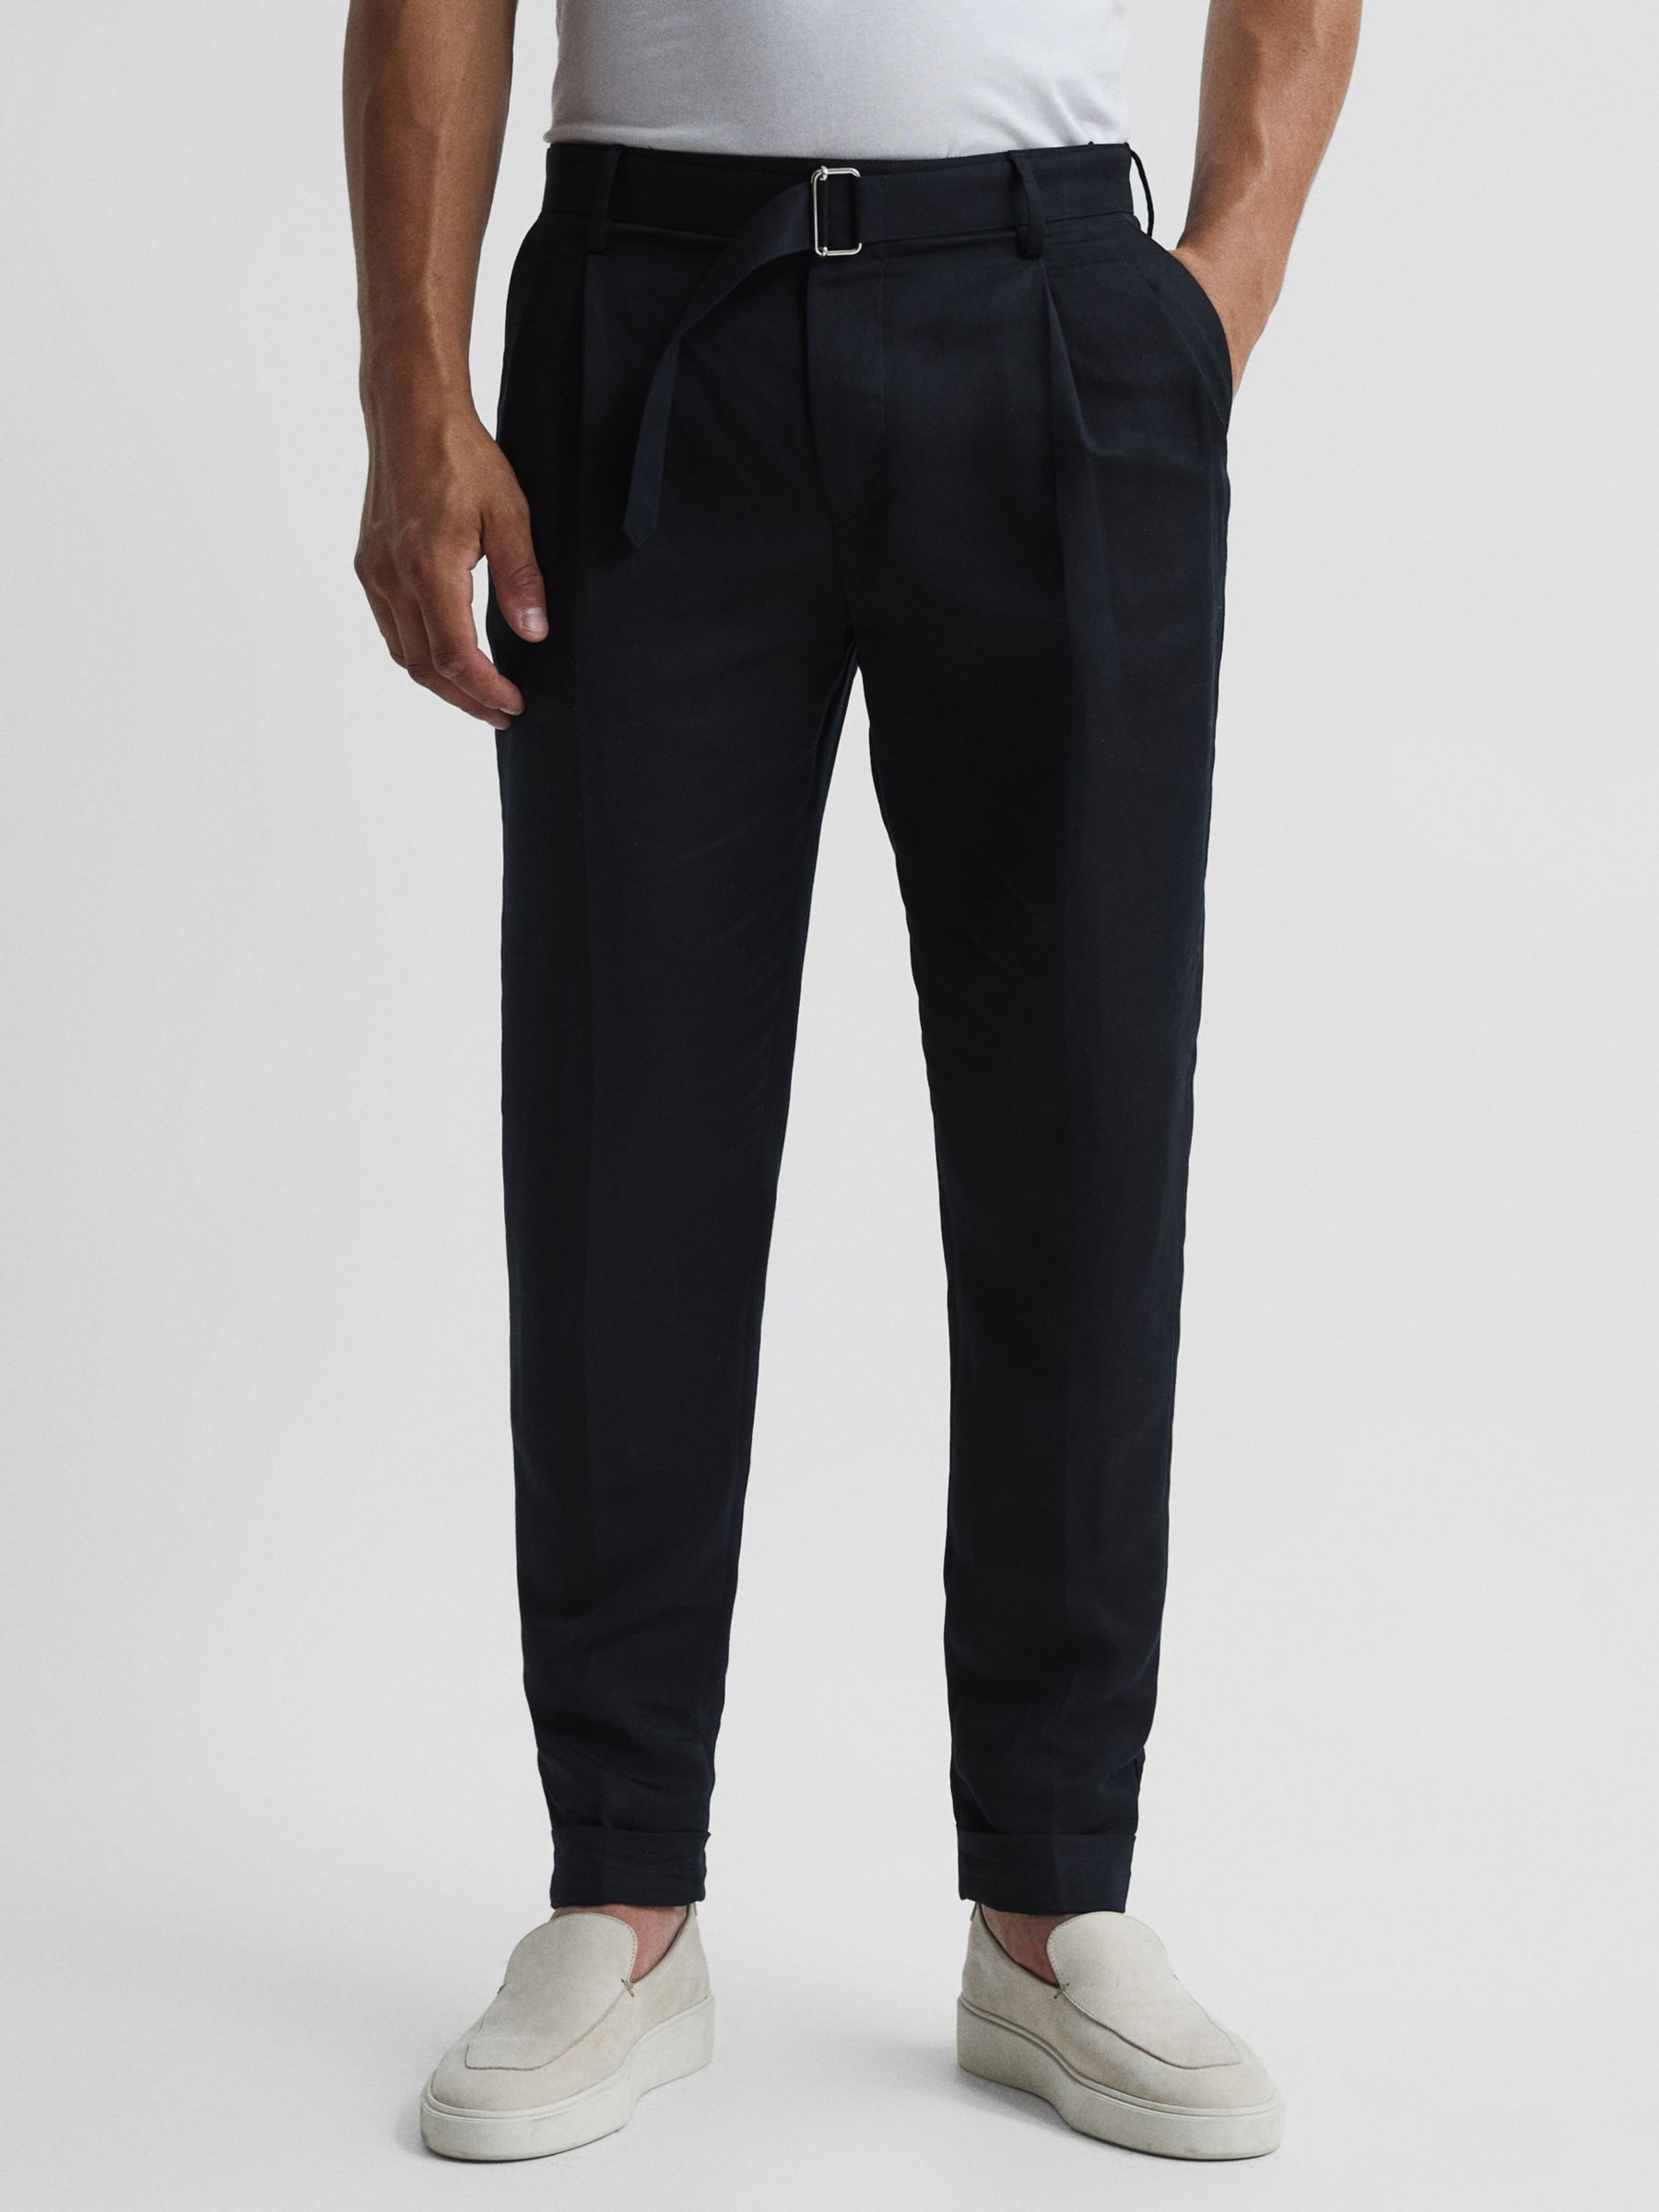 Reiss Crease Belted Tapered Linen Blend Suit Trousers, Navy, 34R